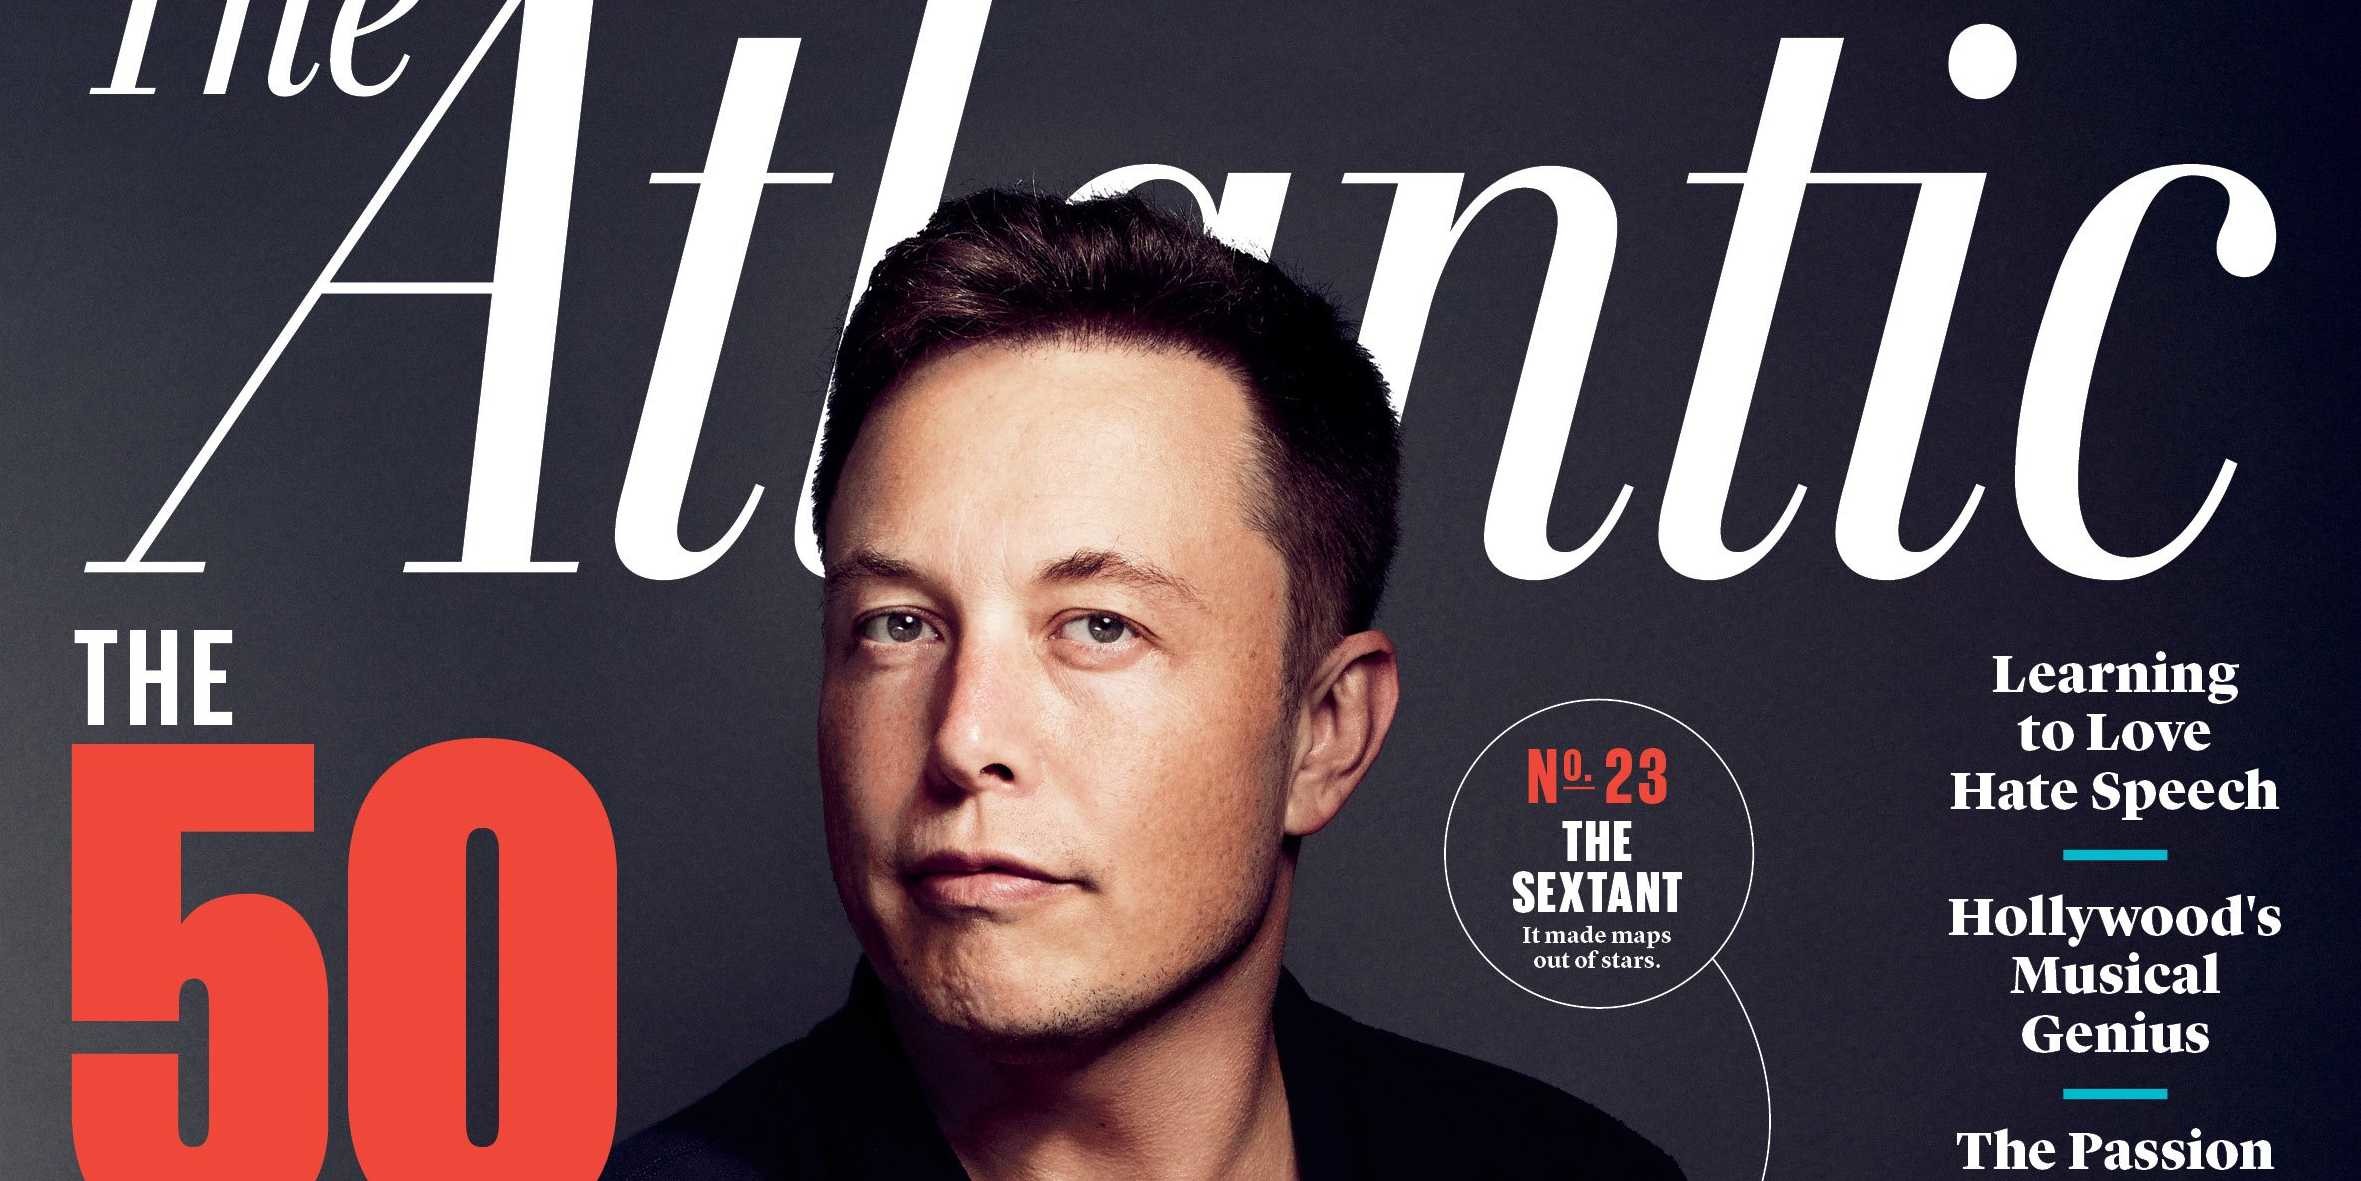 The atlantic asks if elon musk is the